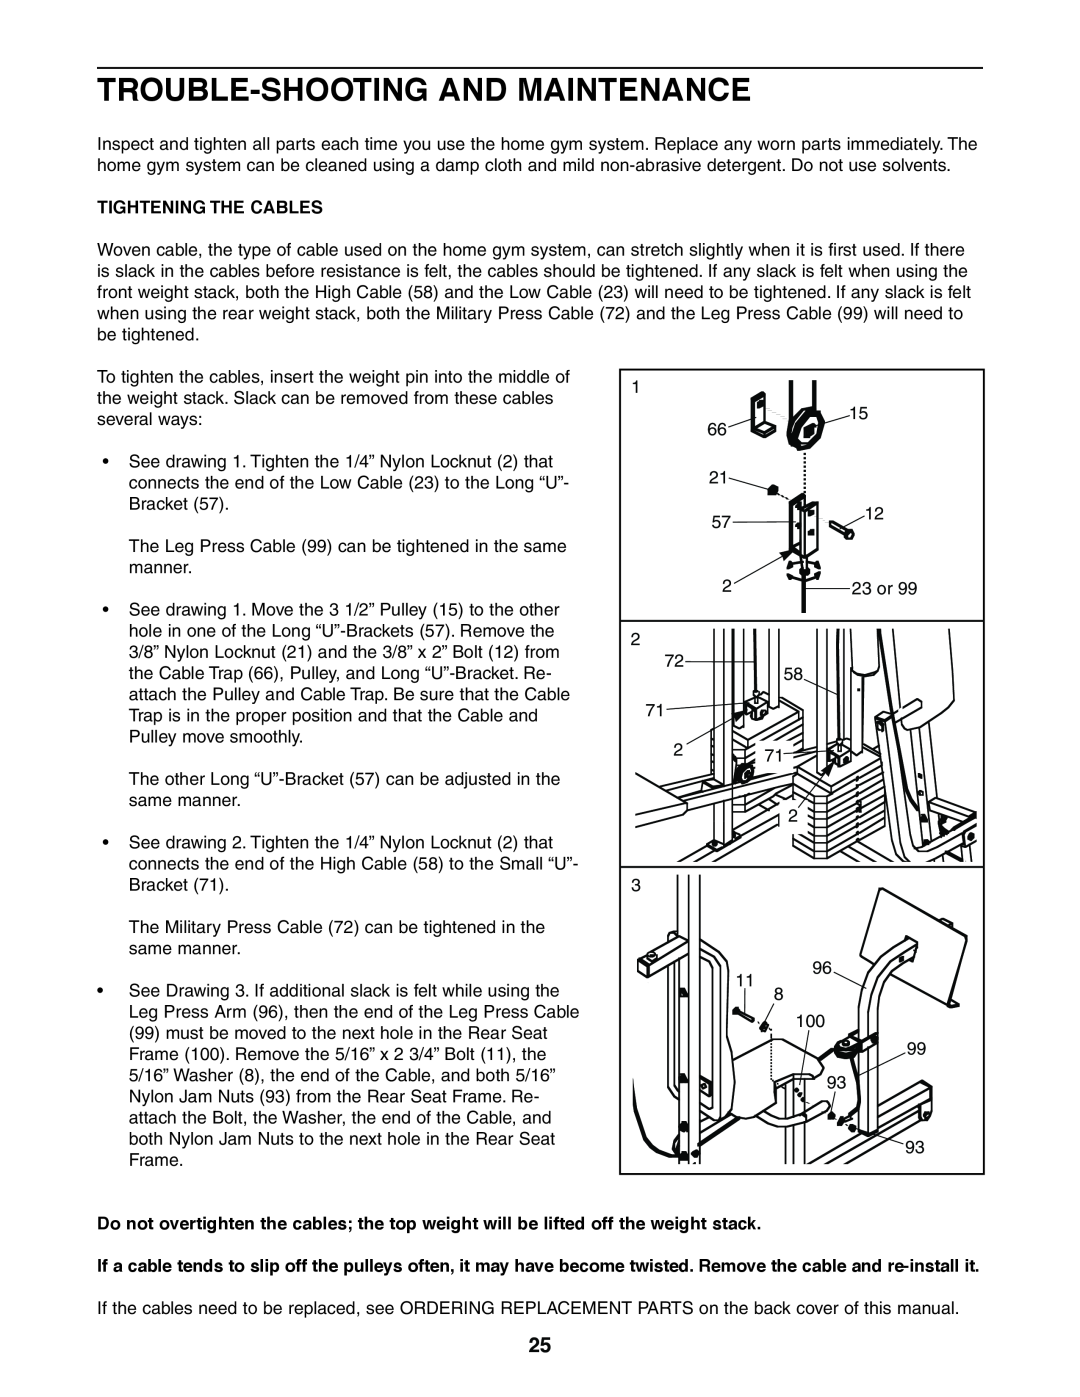 Weider 831.159380 user manual Trouble-Shooting And Maintenance, Tightening The Cables 